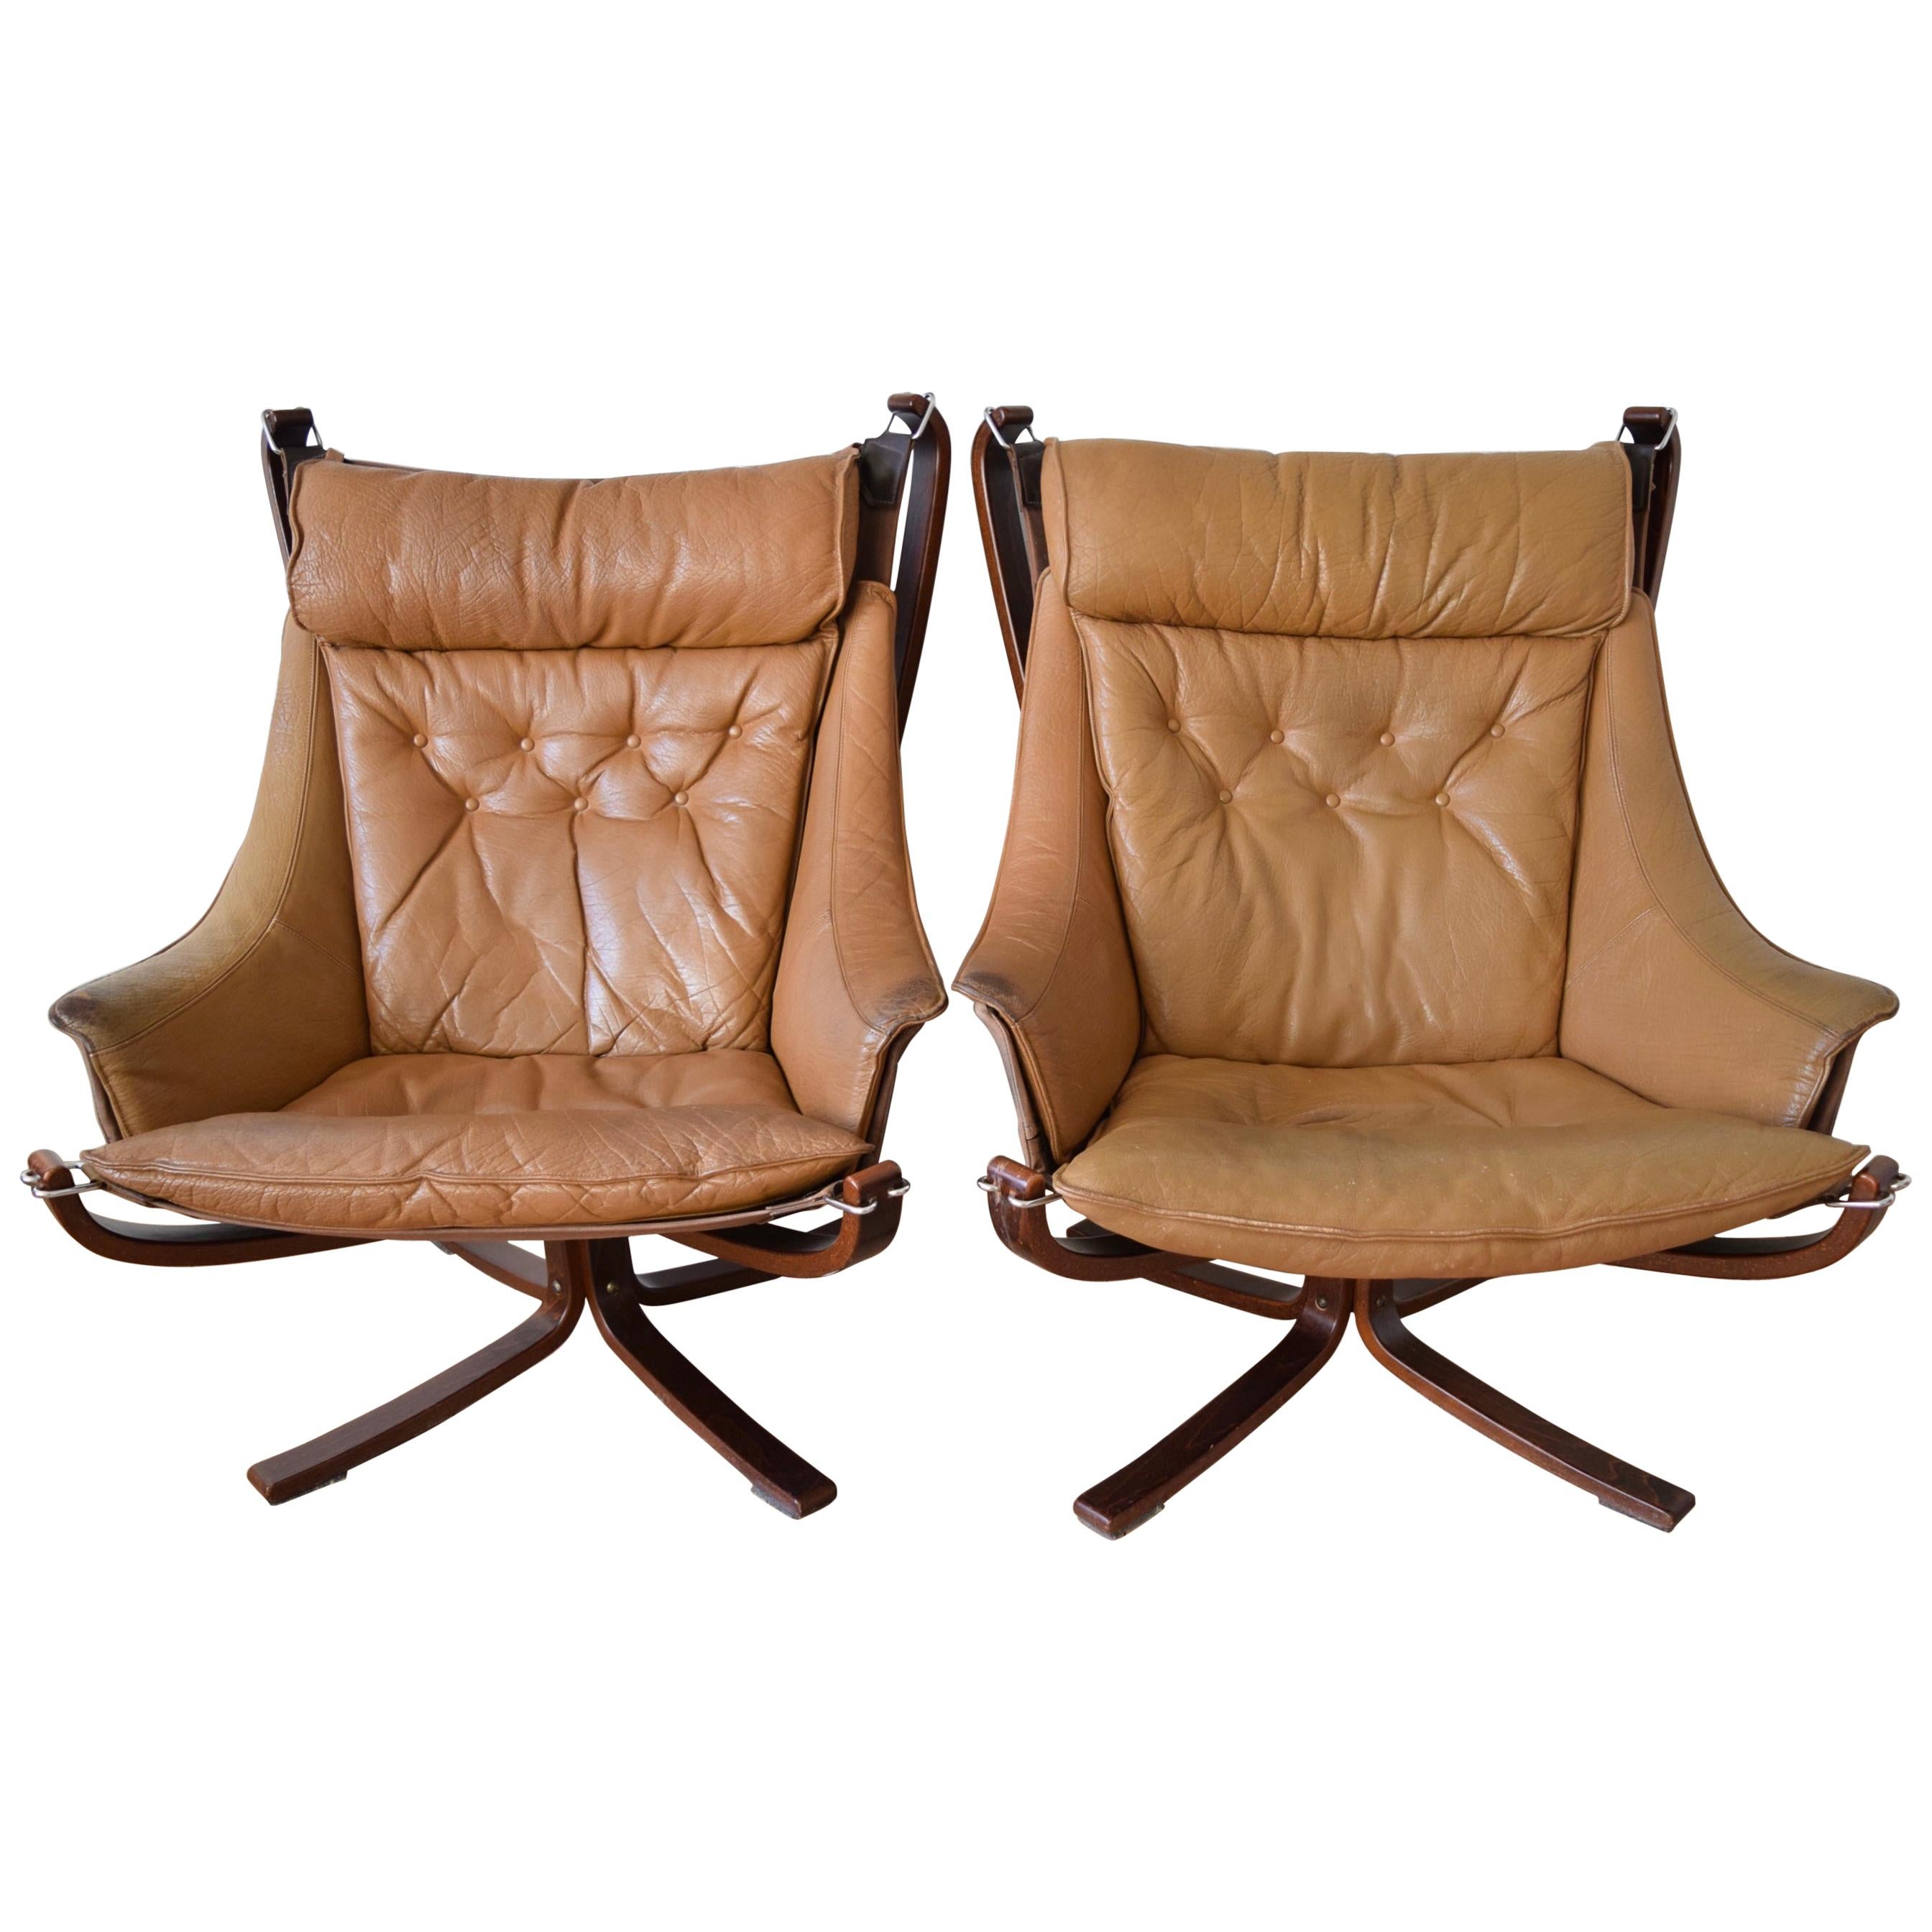 Pair of Midcentury Winged Falcon Chairs, Sigurd Ressel, 1970s For Sale